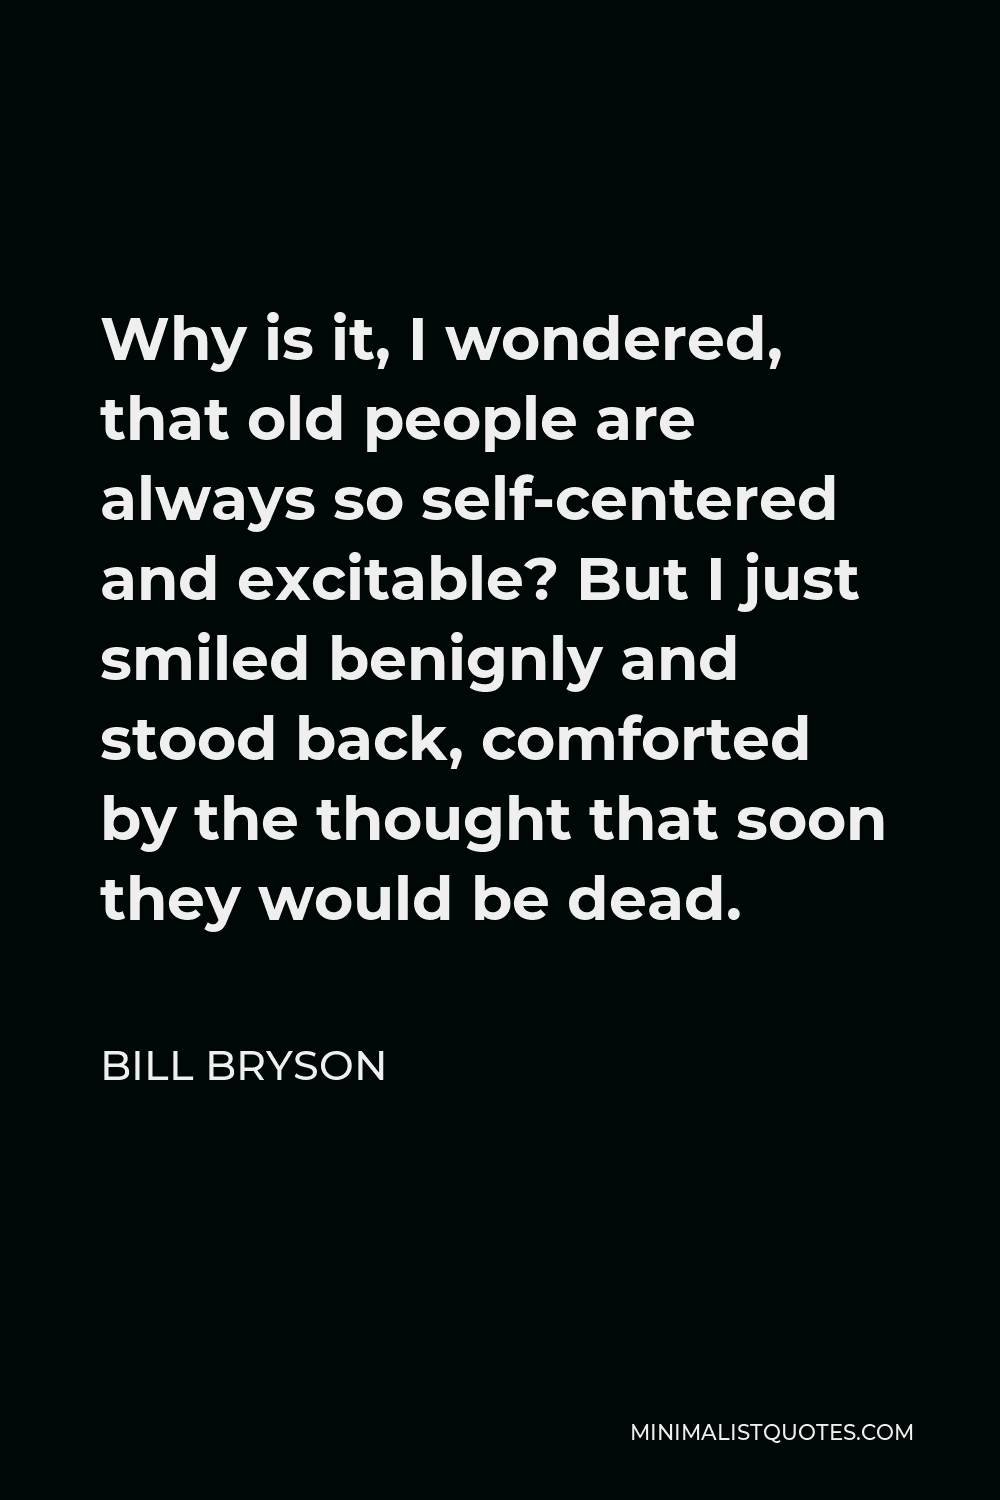 Bill Bryson Quote - Why is it, I wondered, that old people are always so self-centered and excitable? But I just smiled benignly and stood back, comforted by the thought that soon they would be dead.